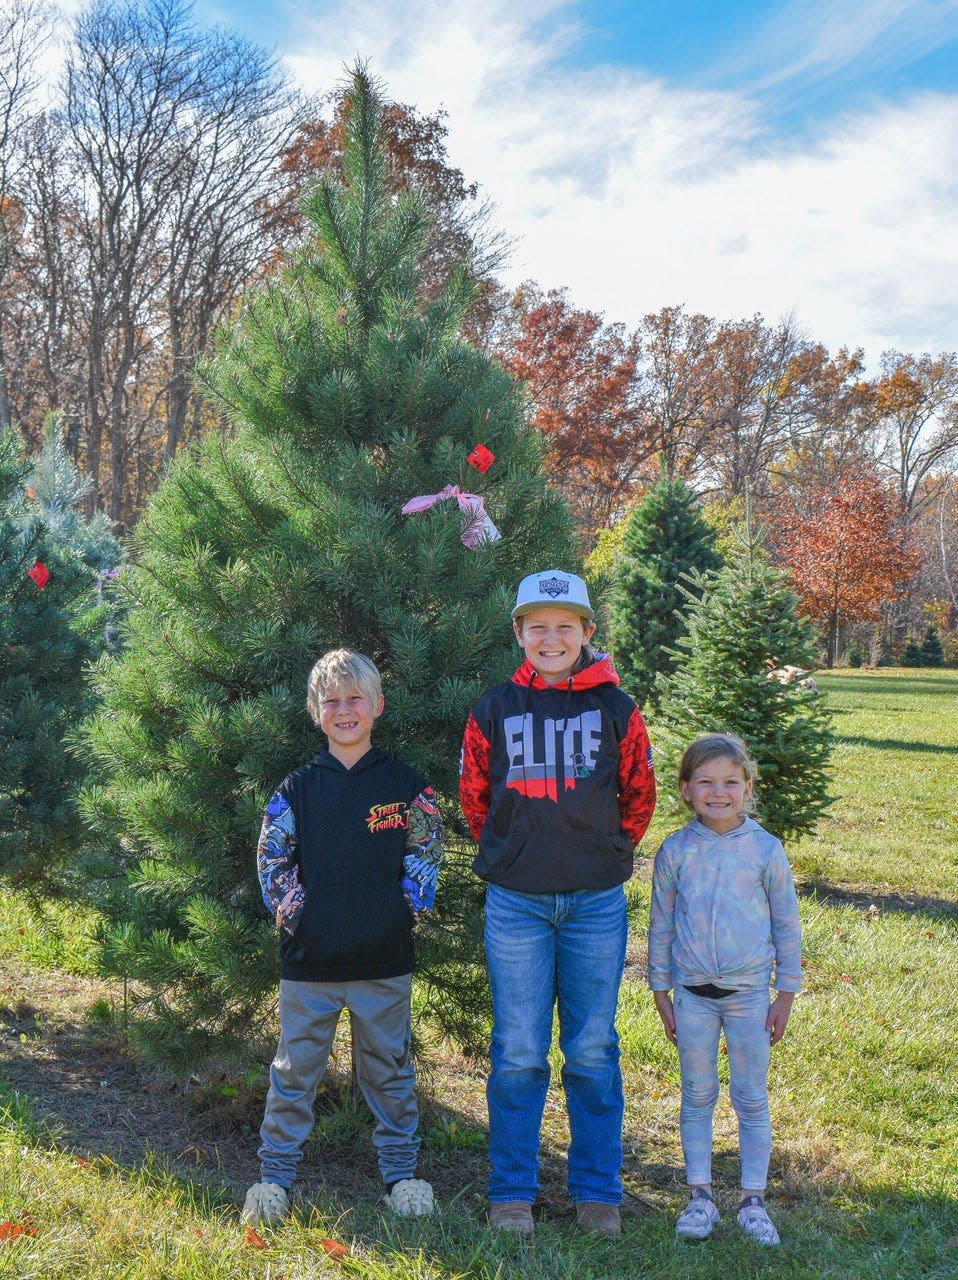 Siblings Eastyn, age 7, Braxtyn, age 11, and Paityn, age 6, Hosseler of Tiffin stand next to the tree they picked with their parents, Brett and Trisha Hosseler, at Hidden Pines Christmas Tree Farm on Nov. 11.